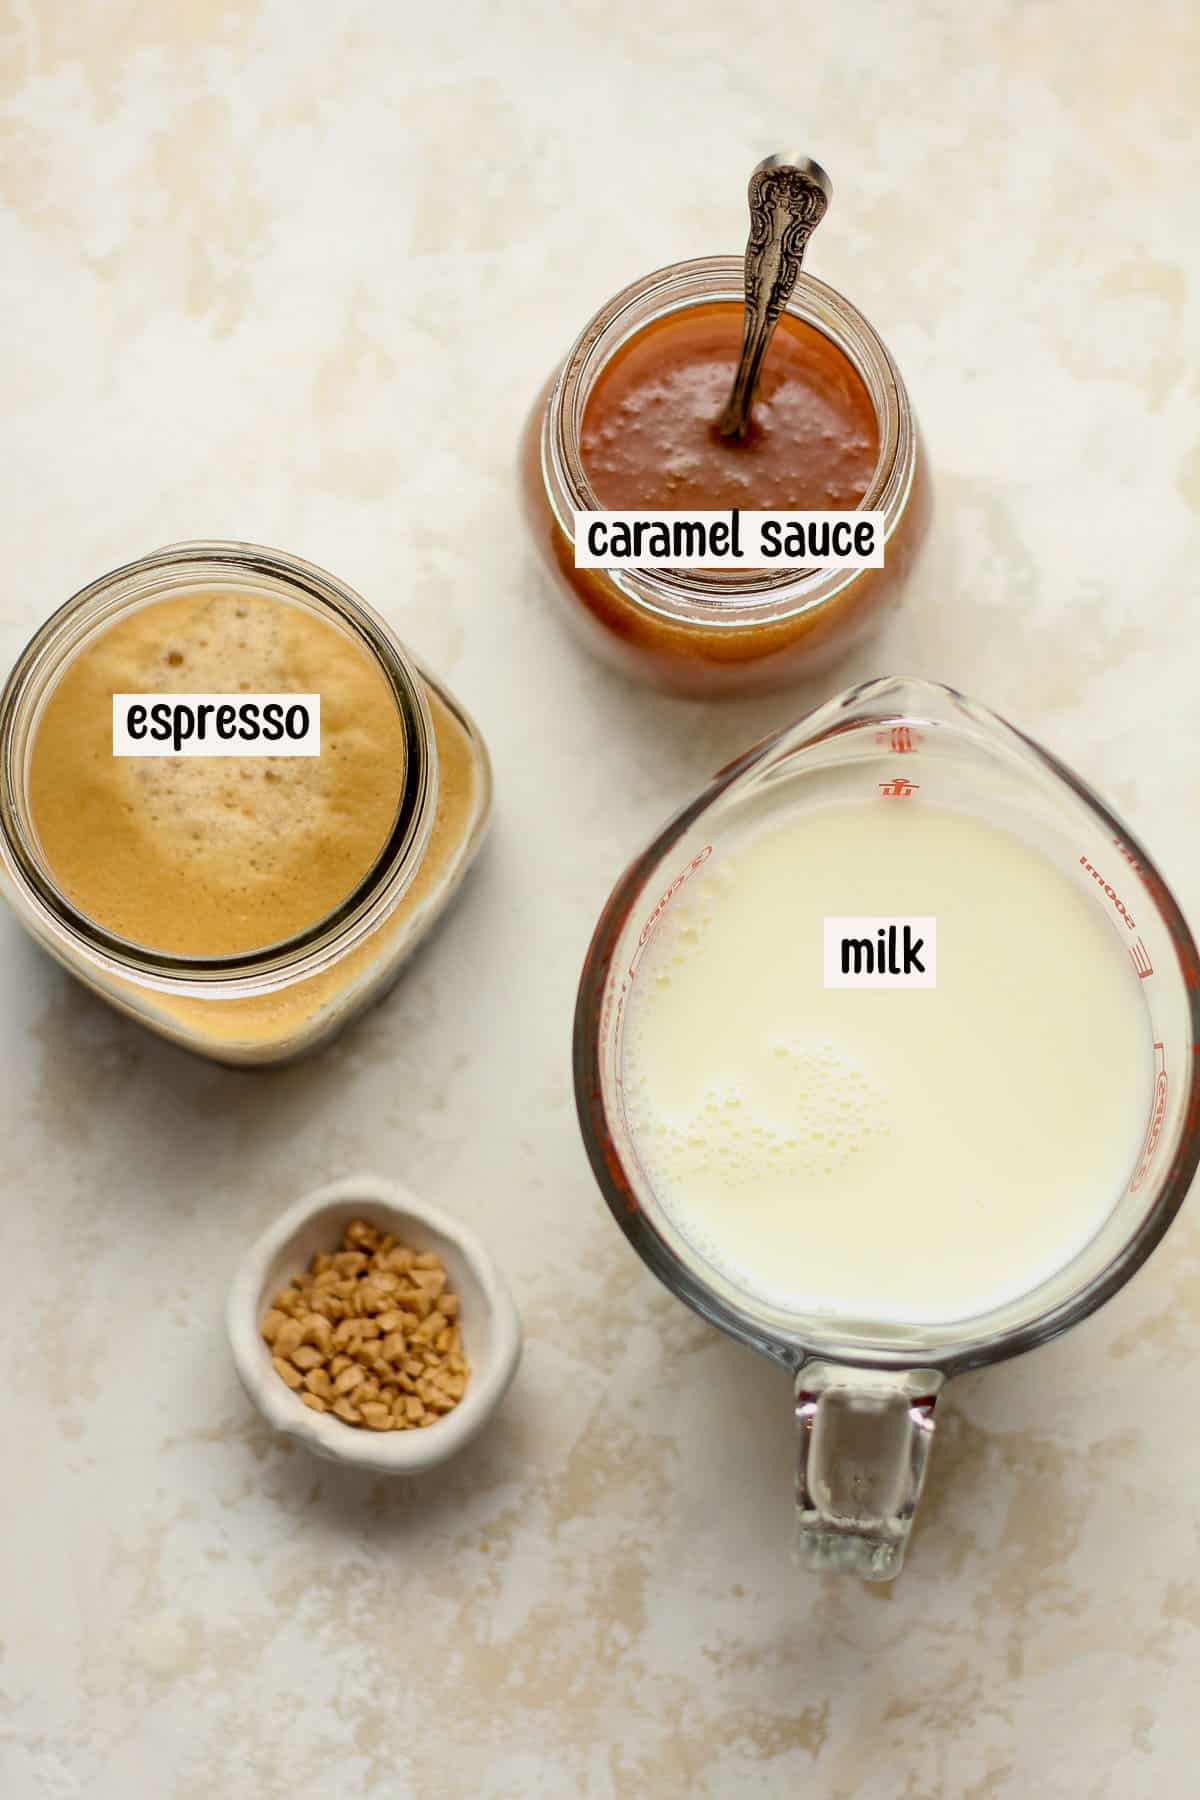 The ingredients, labeled, for a caramel latte.